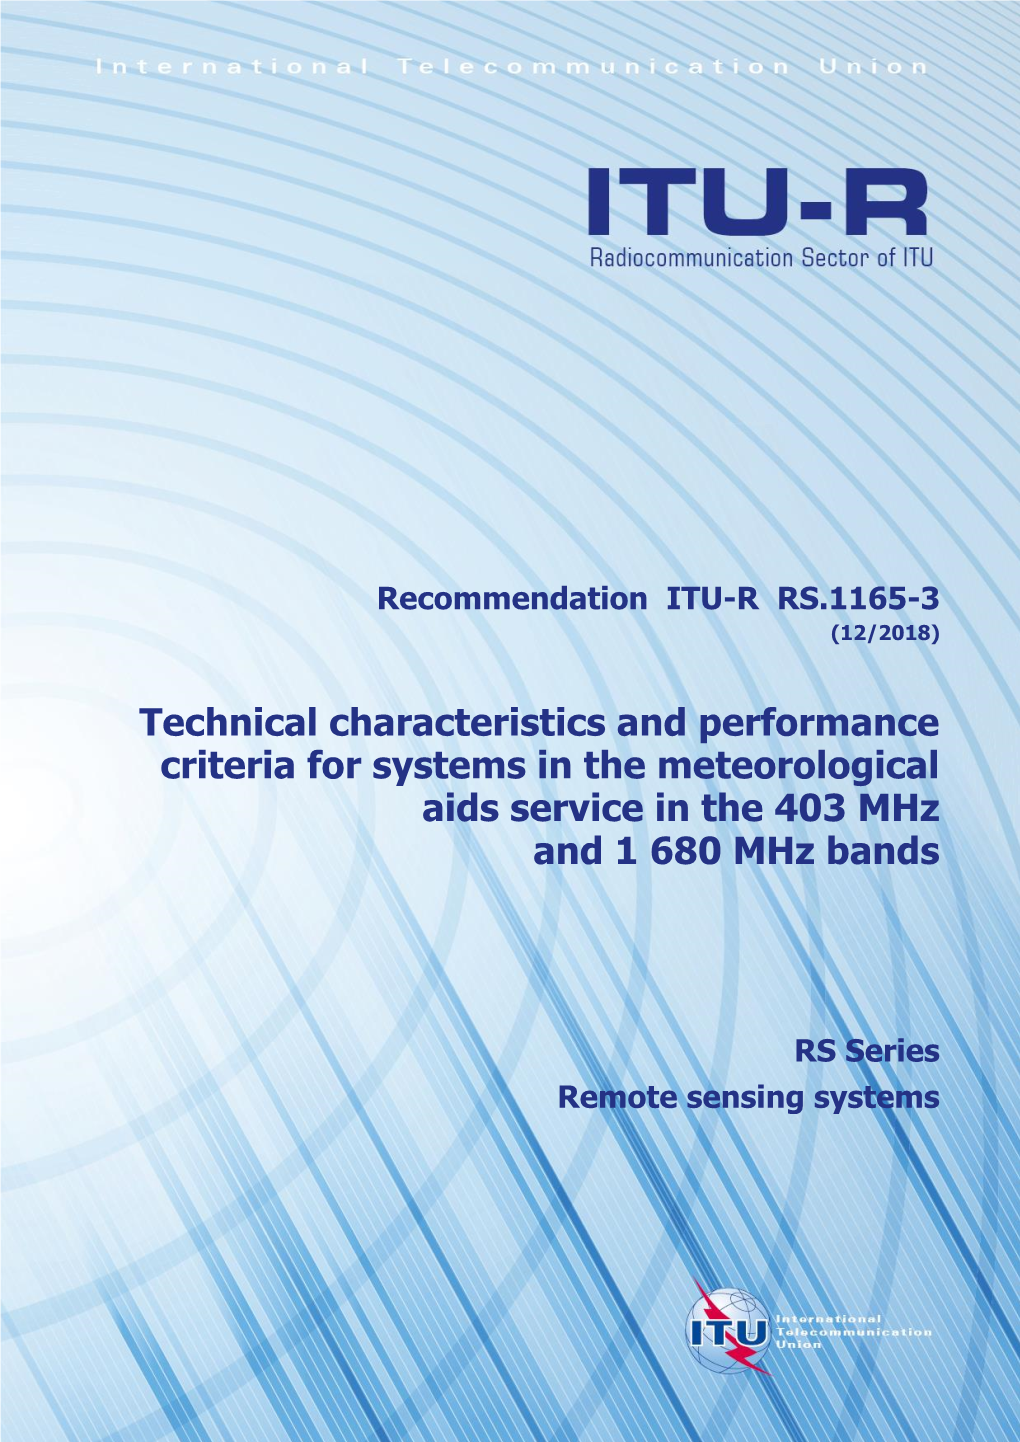 Technical Characteristics and Performance Criteria for Systems in the Meteorological Aids Service in the 403 Mhz and 1 680 Mhz Bands